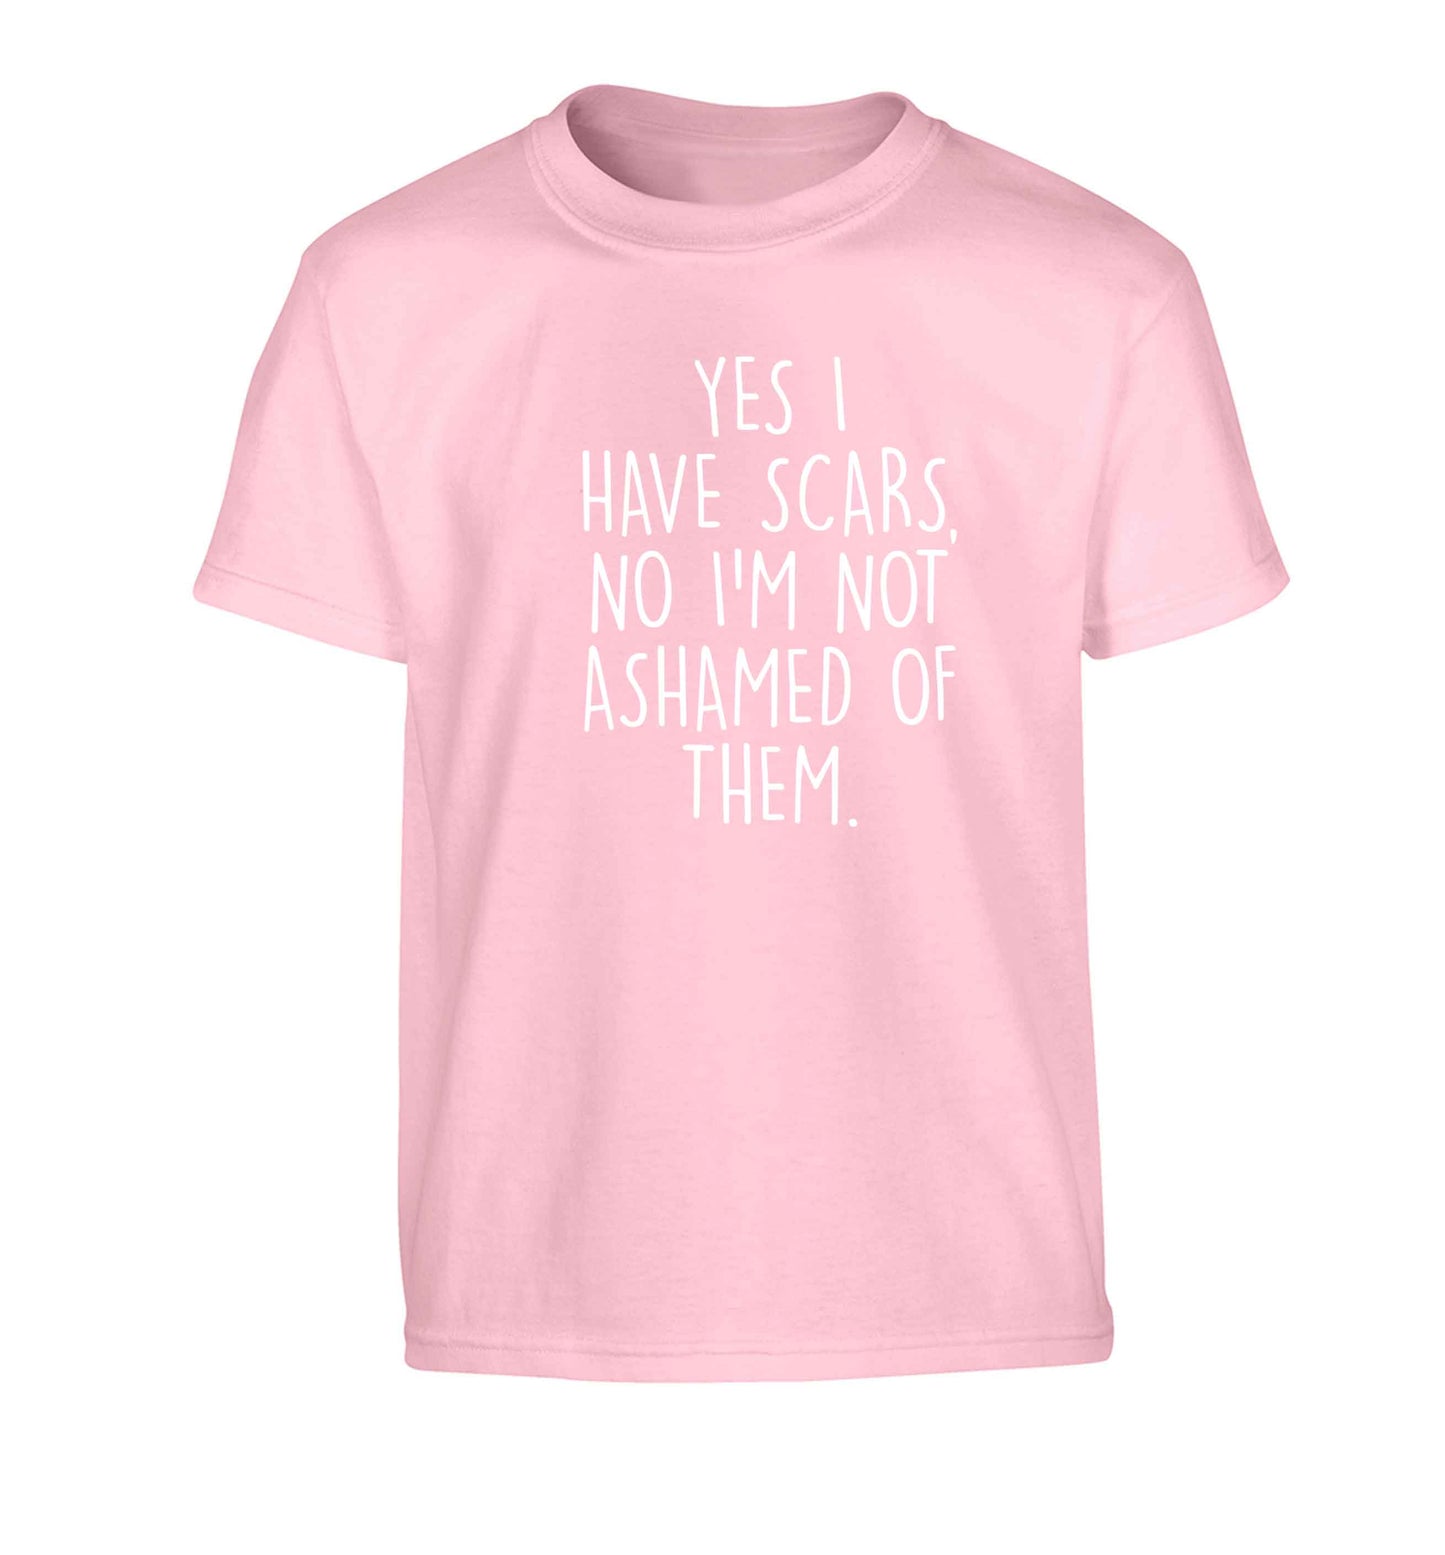 Yes I have scars, no I'm not ashamed of them Children's light pink Tshirt 12-13 Years